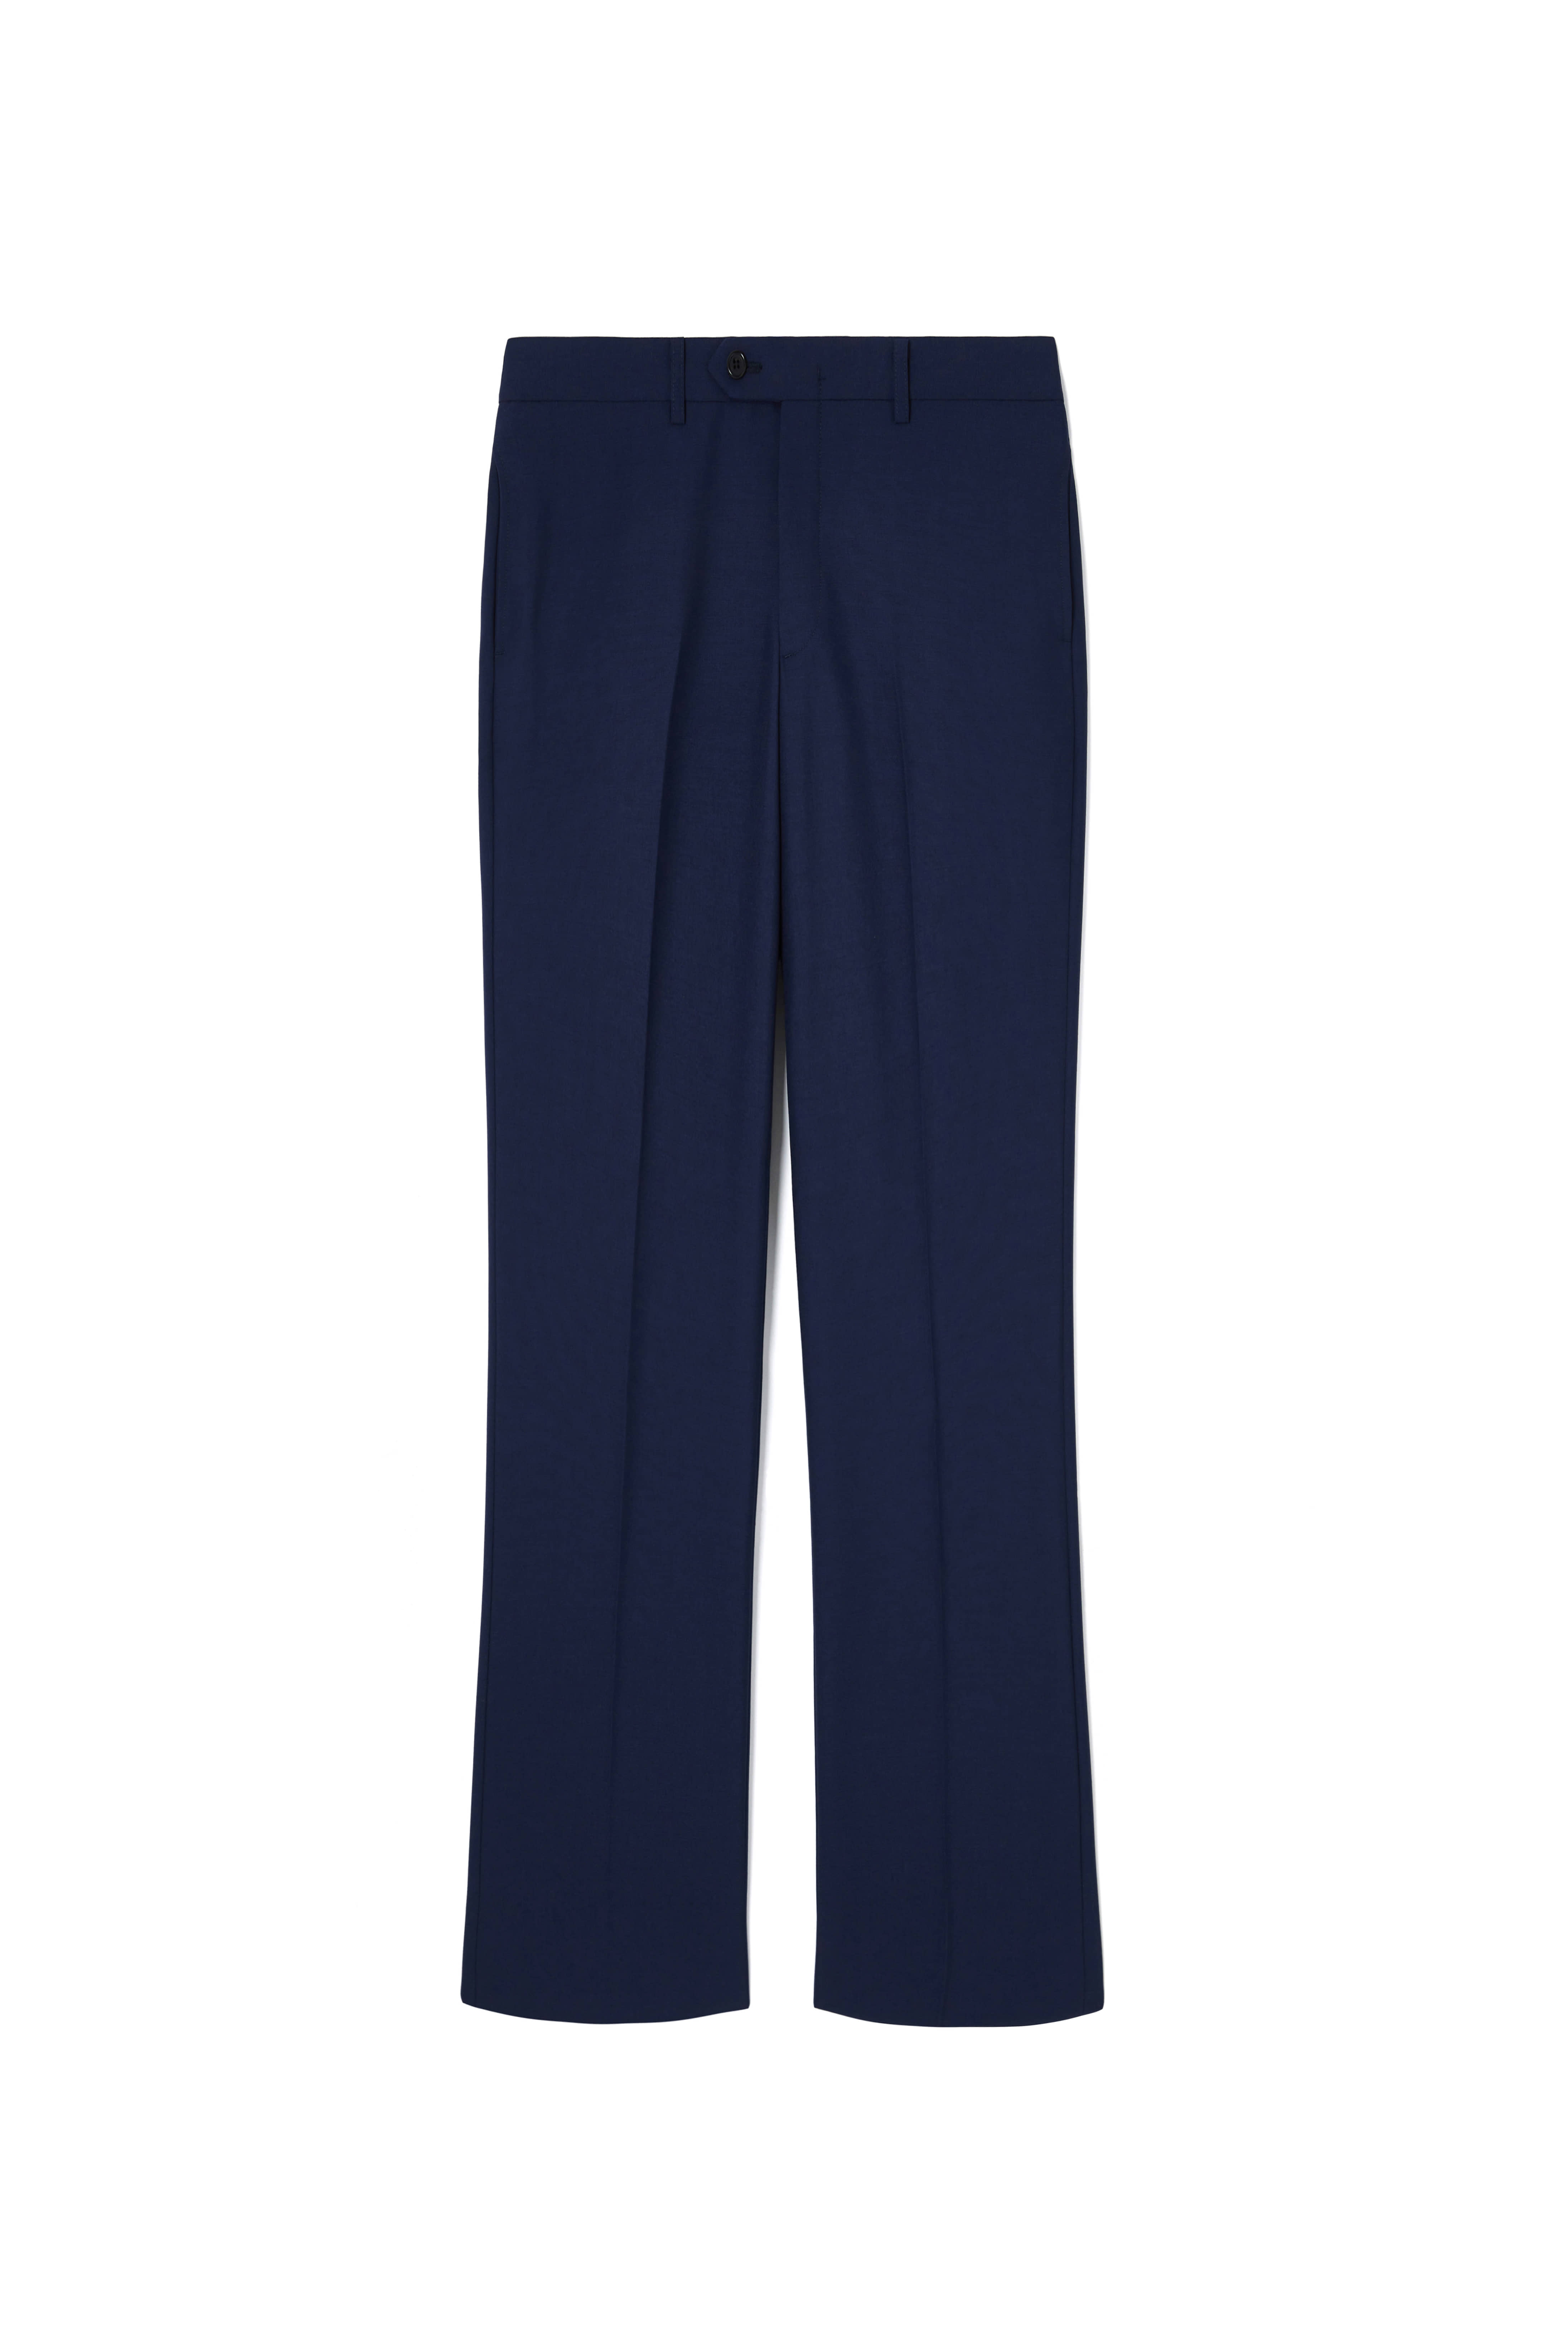 CIRCUSFALSE: FLARE PANTS IN BLUE